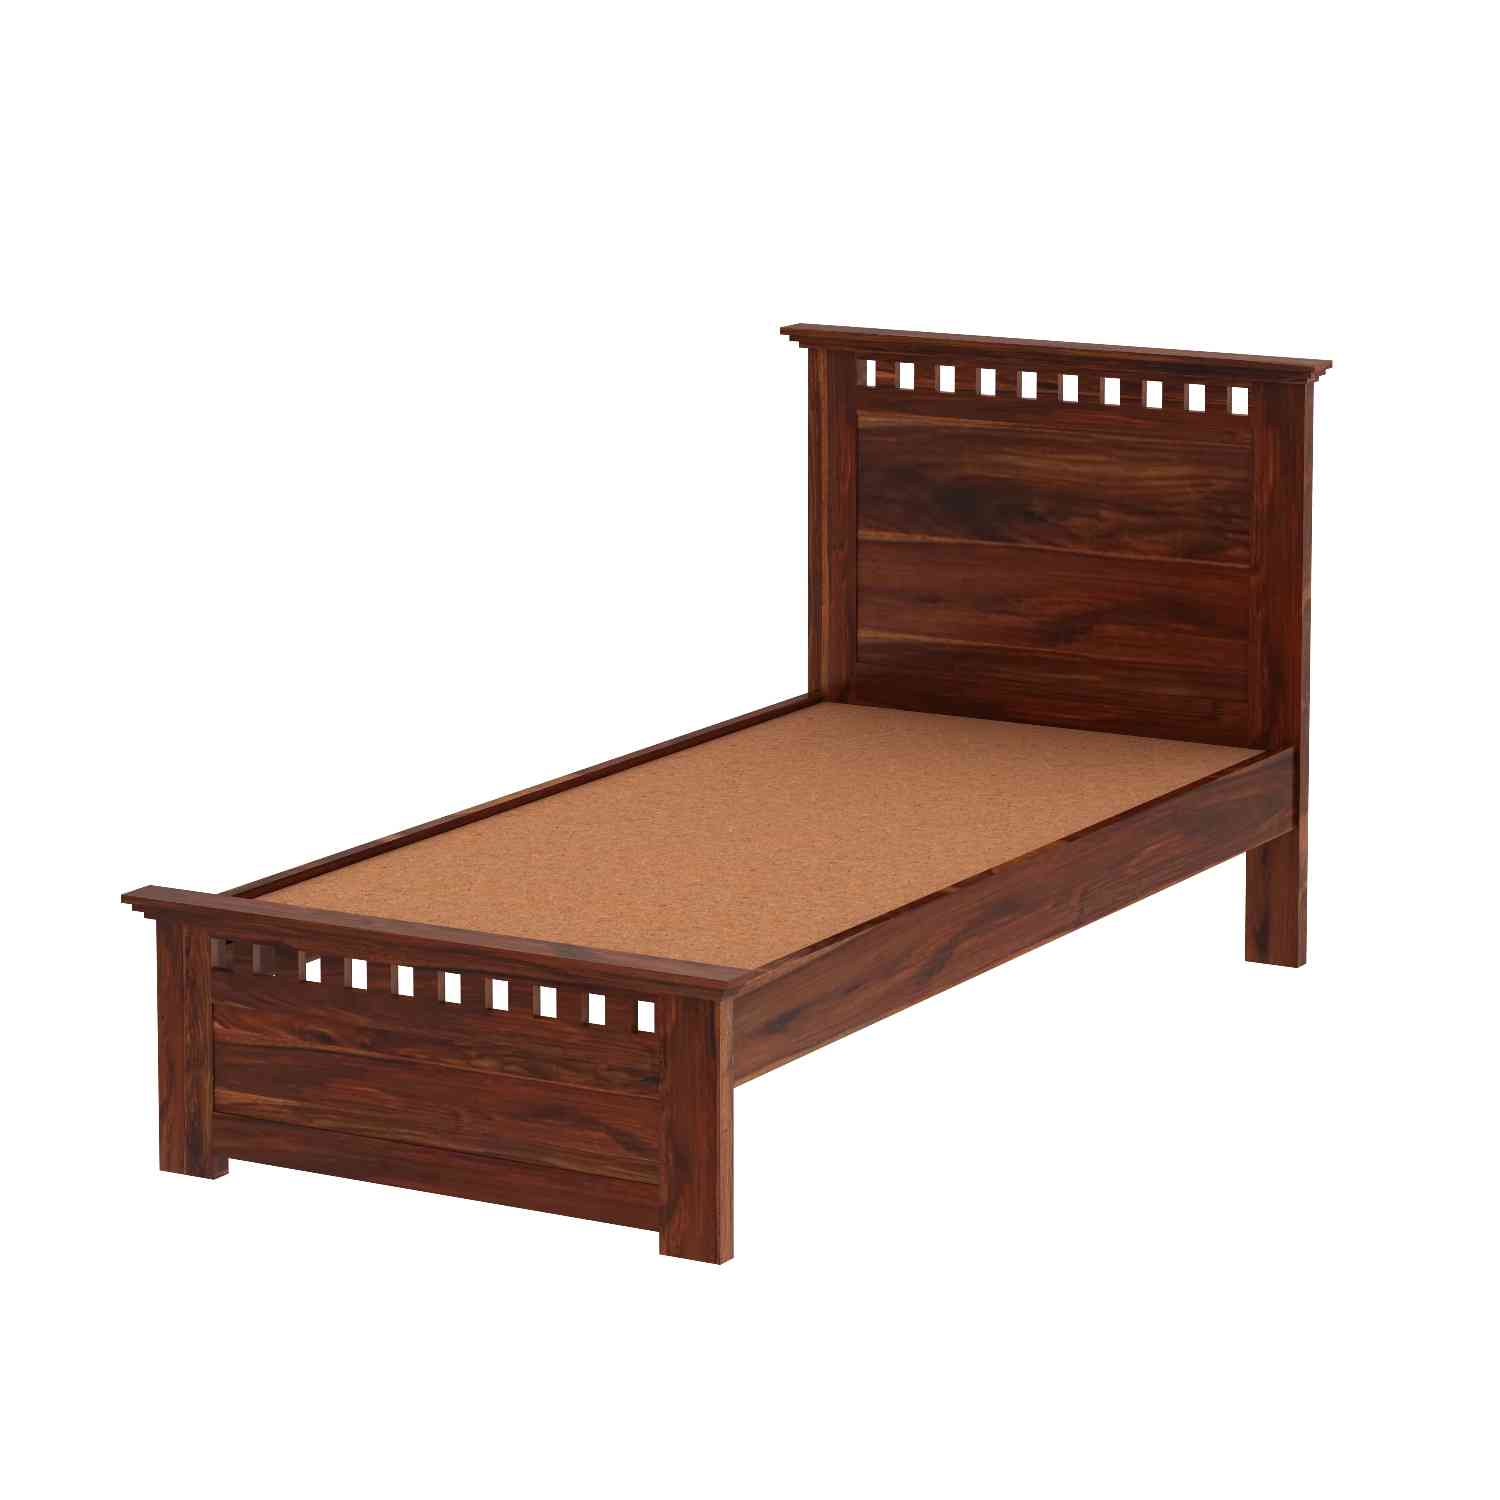 Amer Solid Sheesham Wood Single Bed Without Storage (Natural Finish)